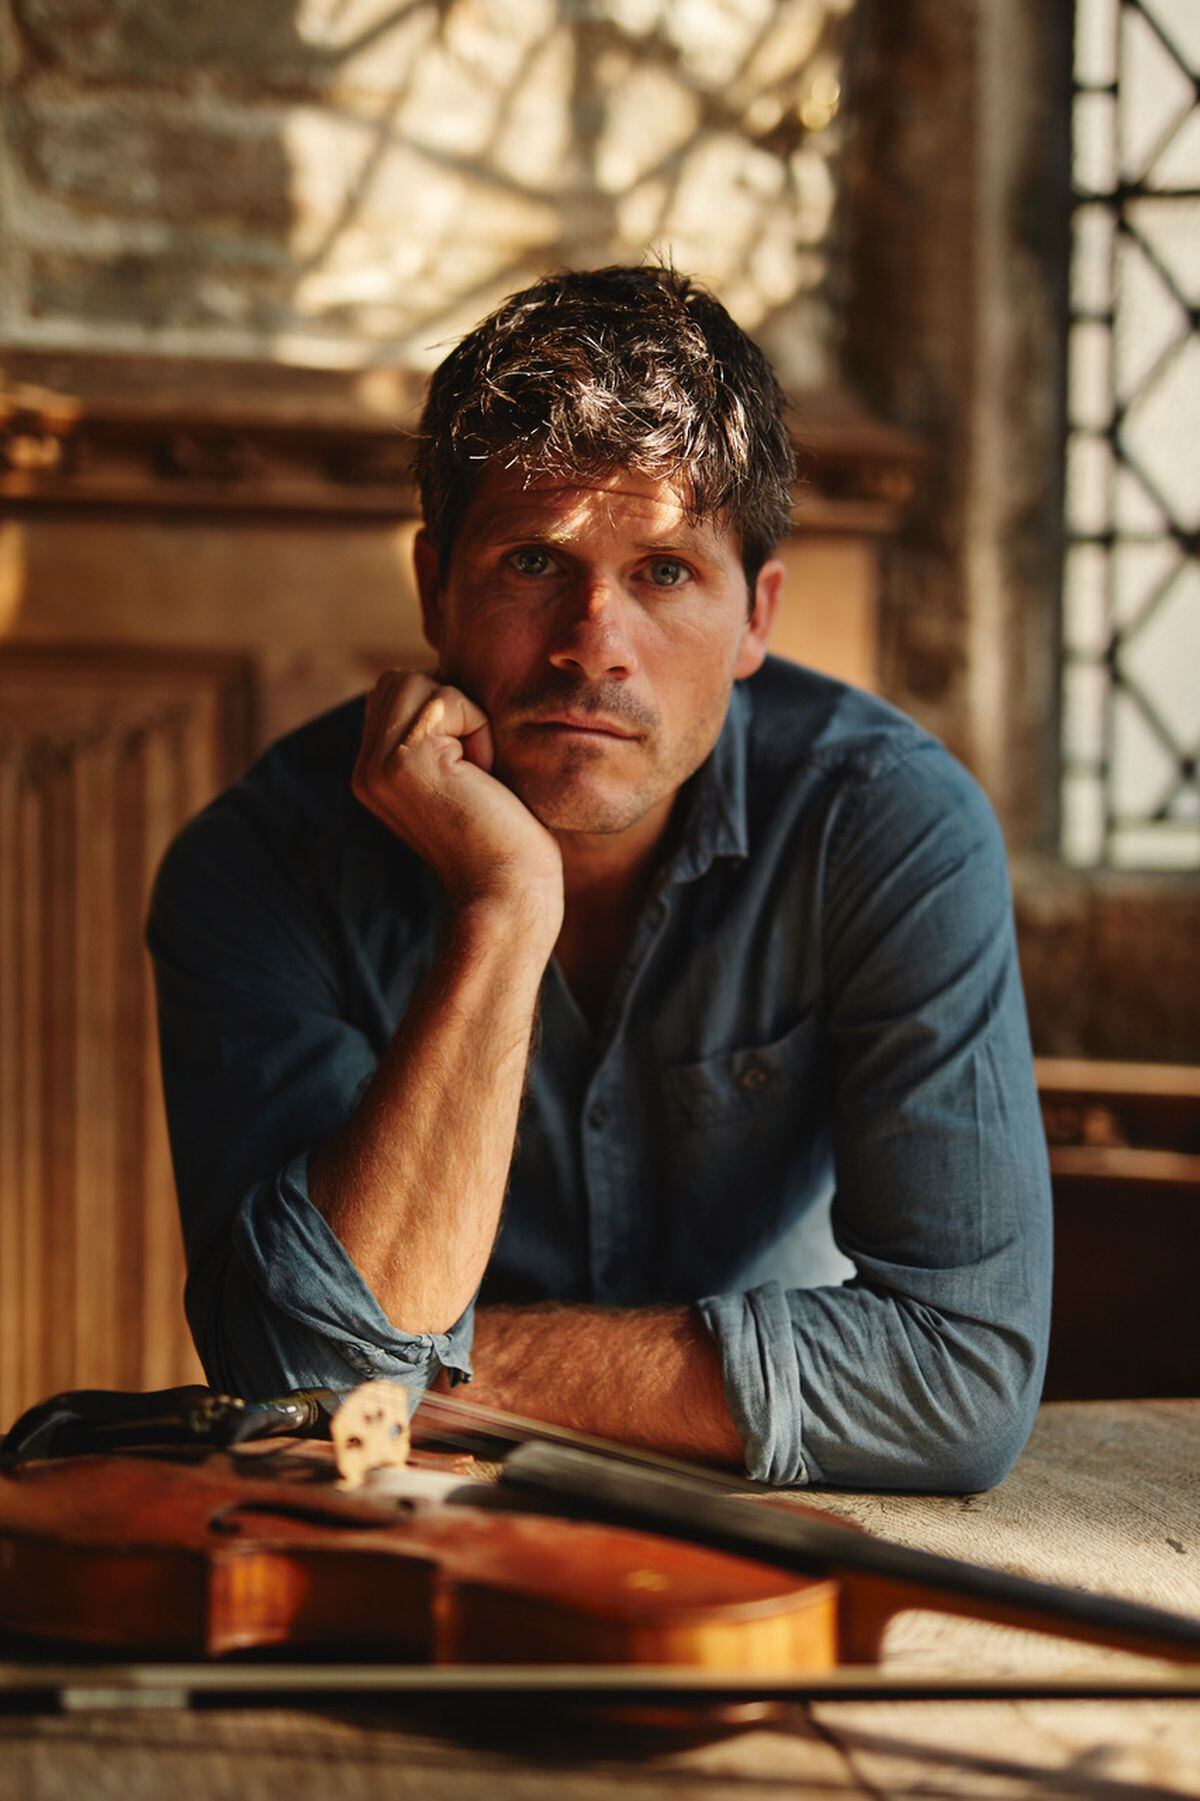 Seth Lakeman is one of the headliners announced